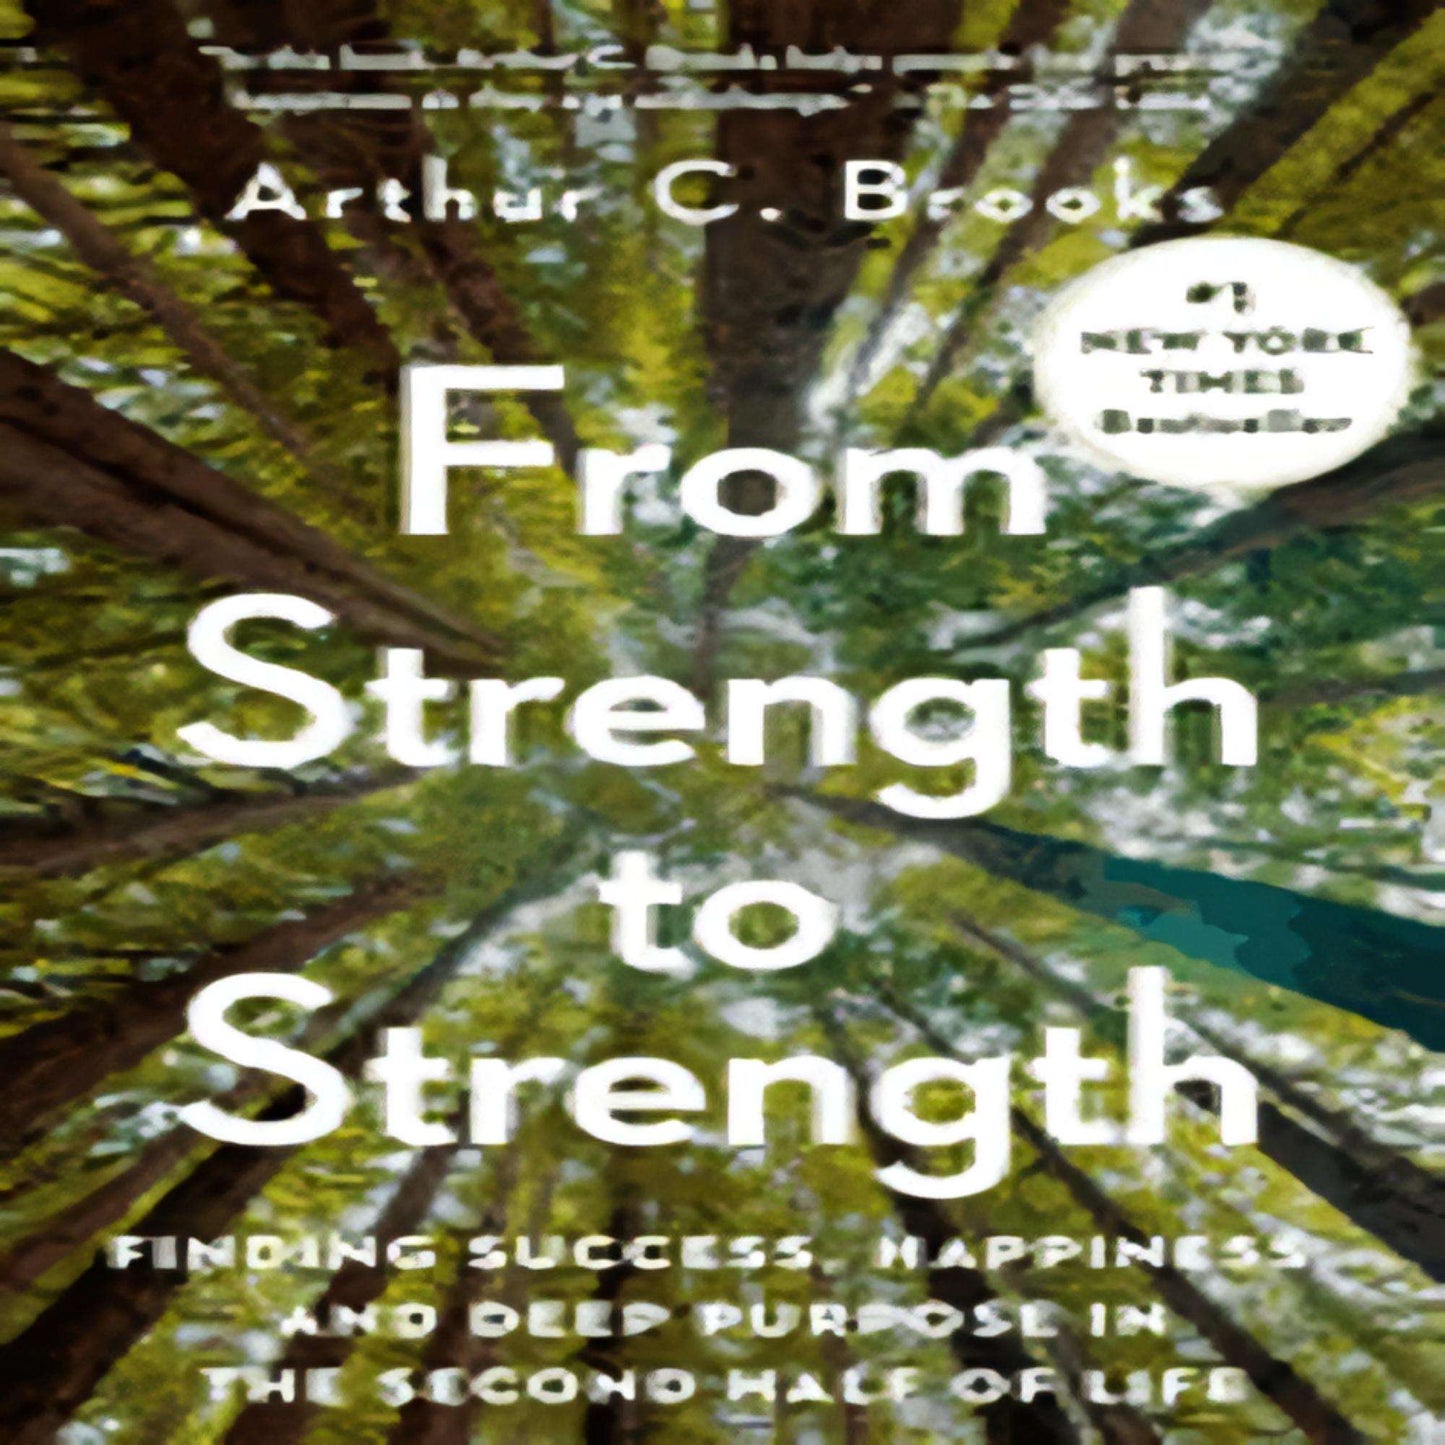 From Strength to Strength: Finding Success, Happiness, and Deep Purpose in the Second Half of Life117-022123-059319148XDPGBOOKSTORE.COM. Today's Bestsellers.